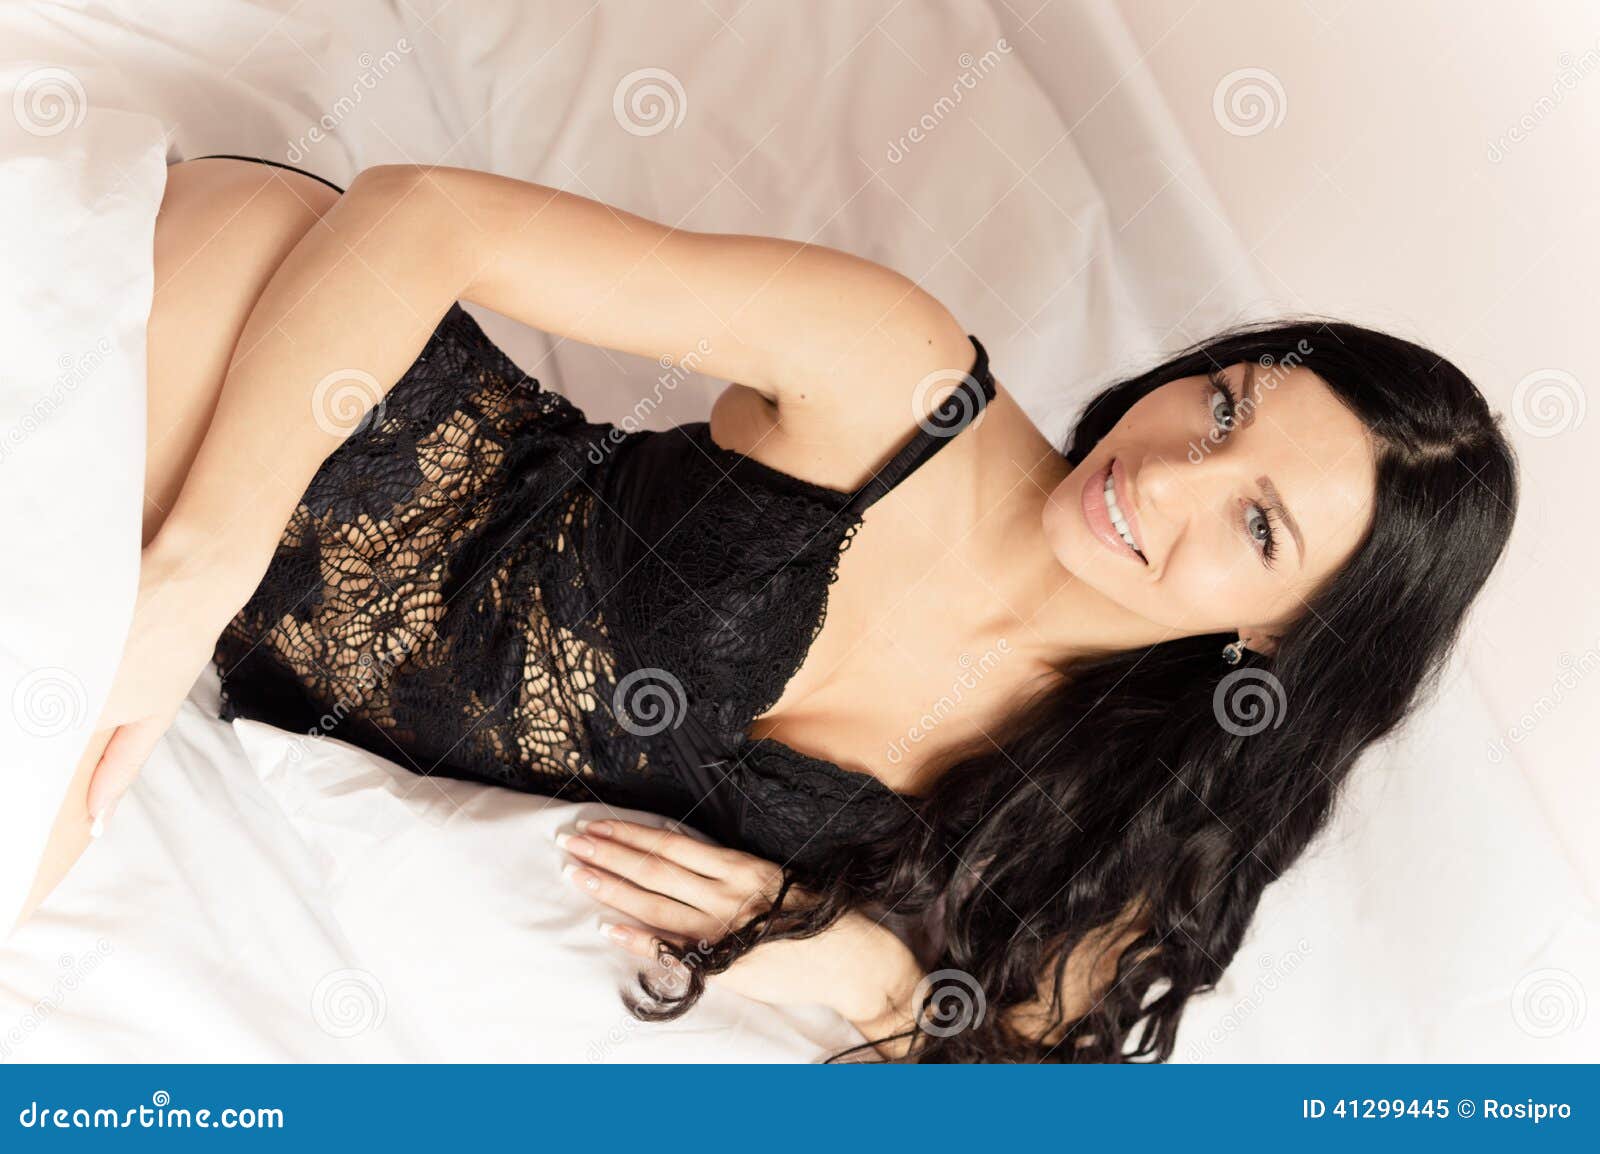 Brunette Girl with Blue Eyes in Black Lingerie Lying on White Bed Looking at Camera Smiling Portrait Image Stock Image photo